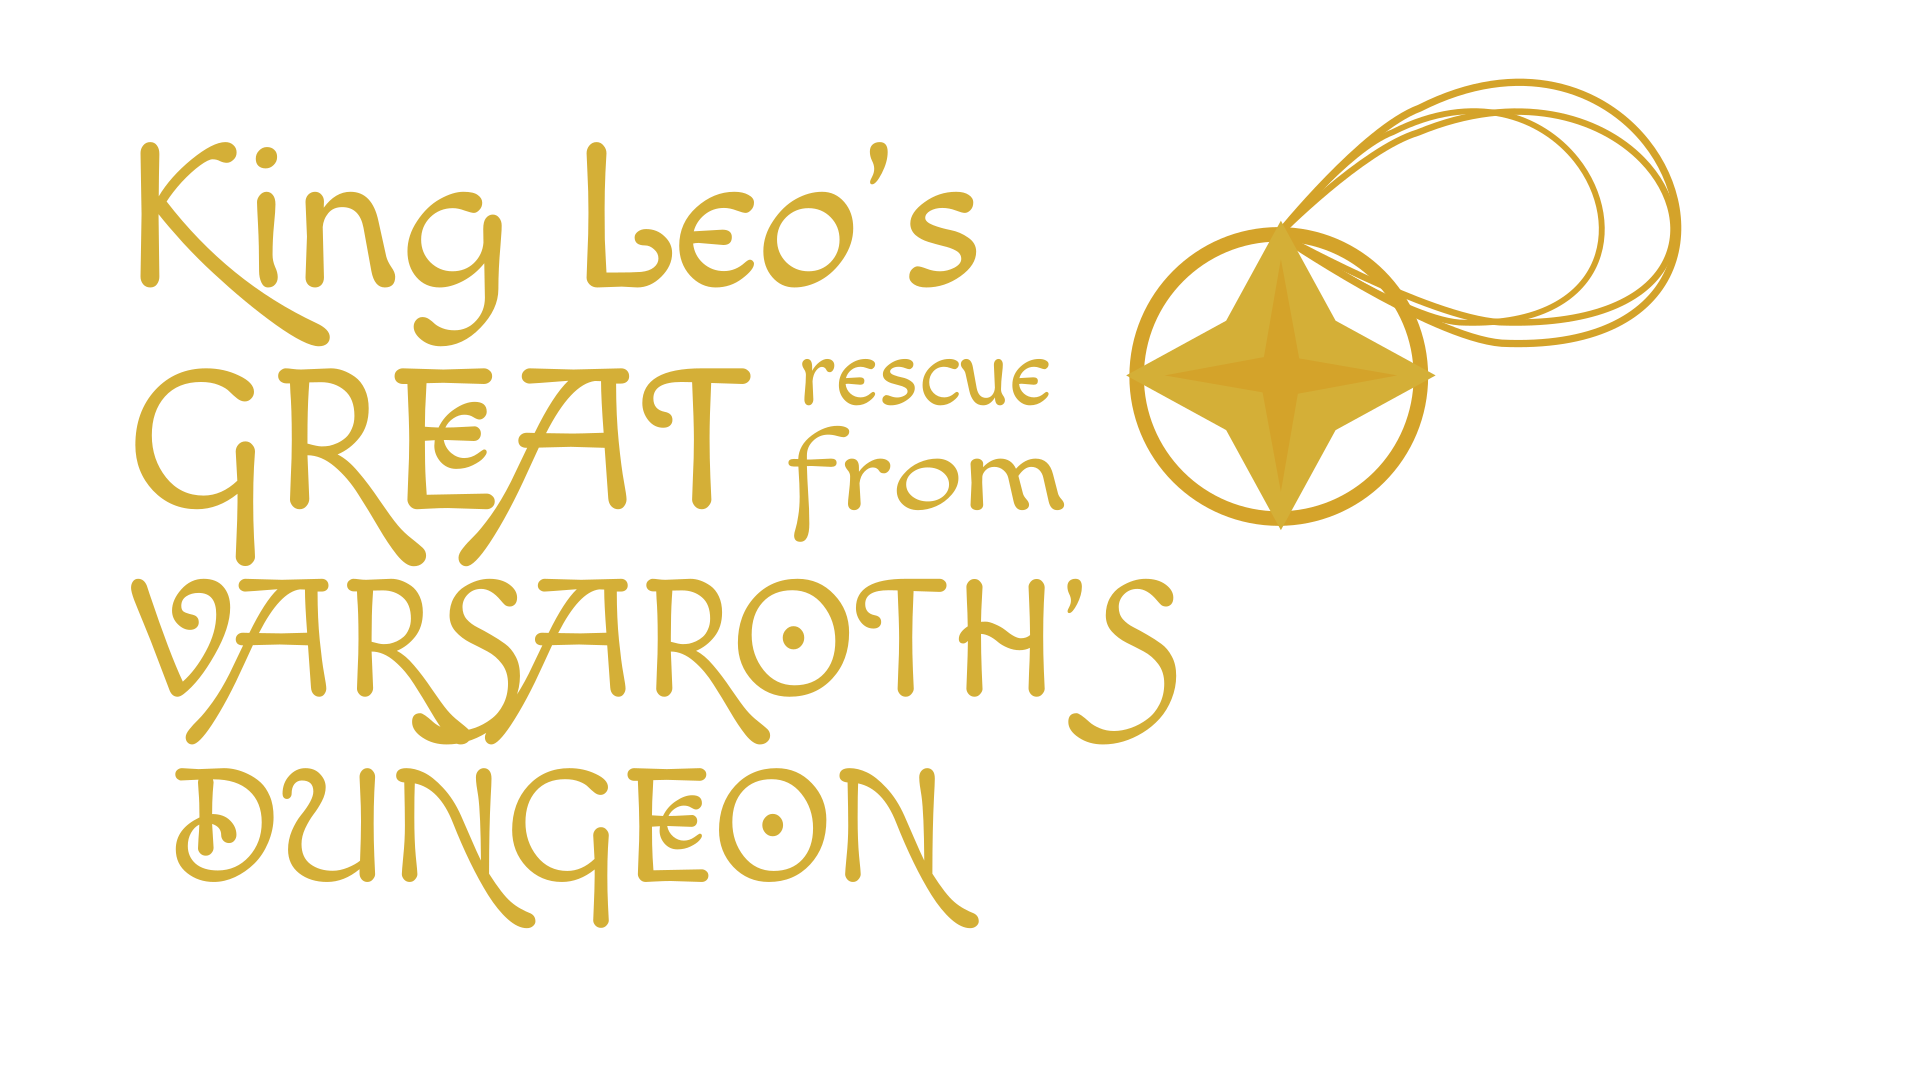 King Leo's Great Rescue From Varsaroth's Dungeon